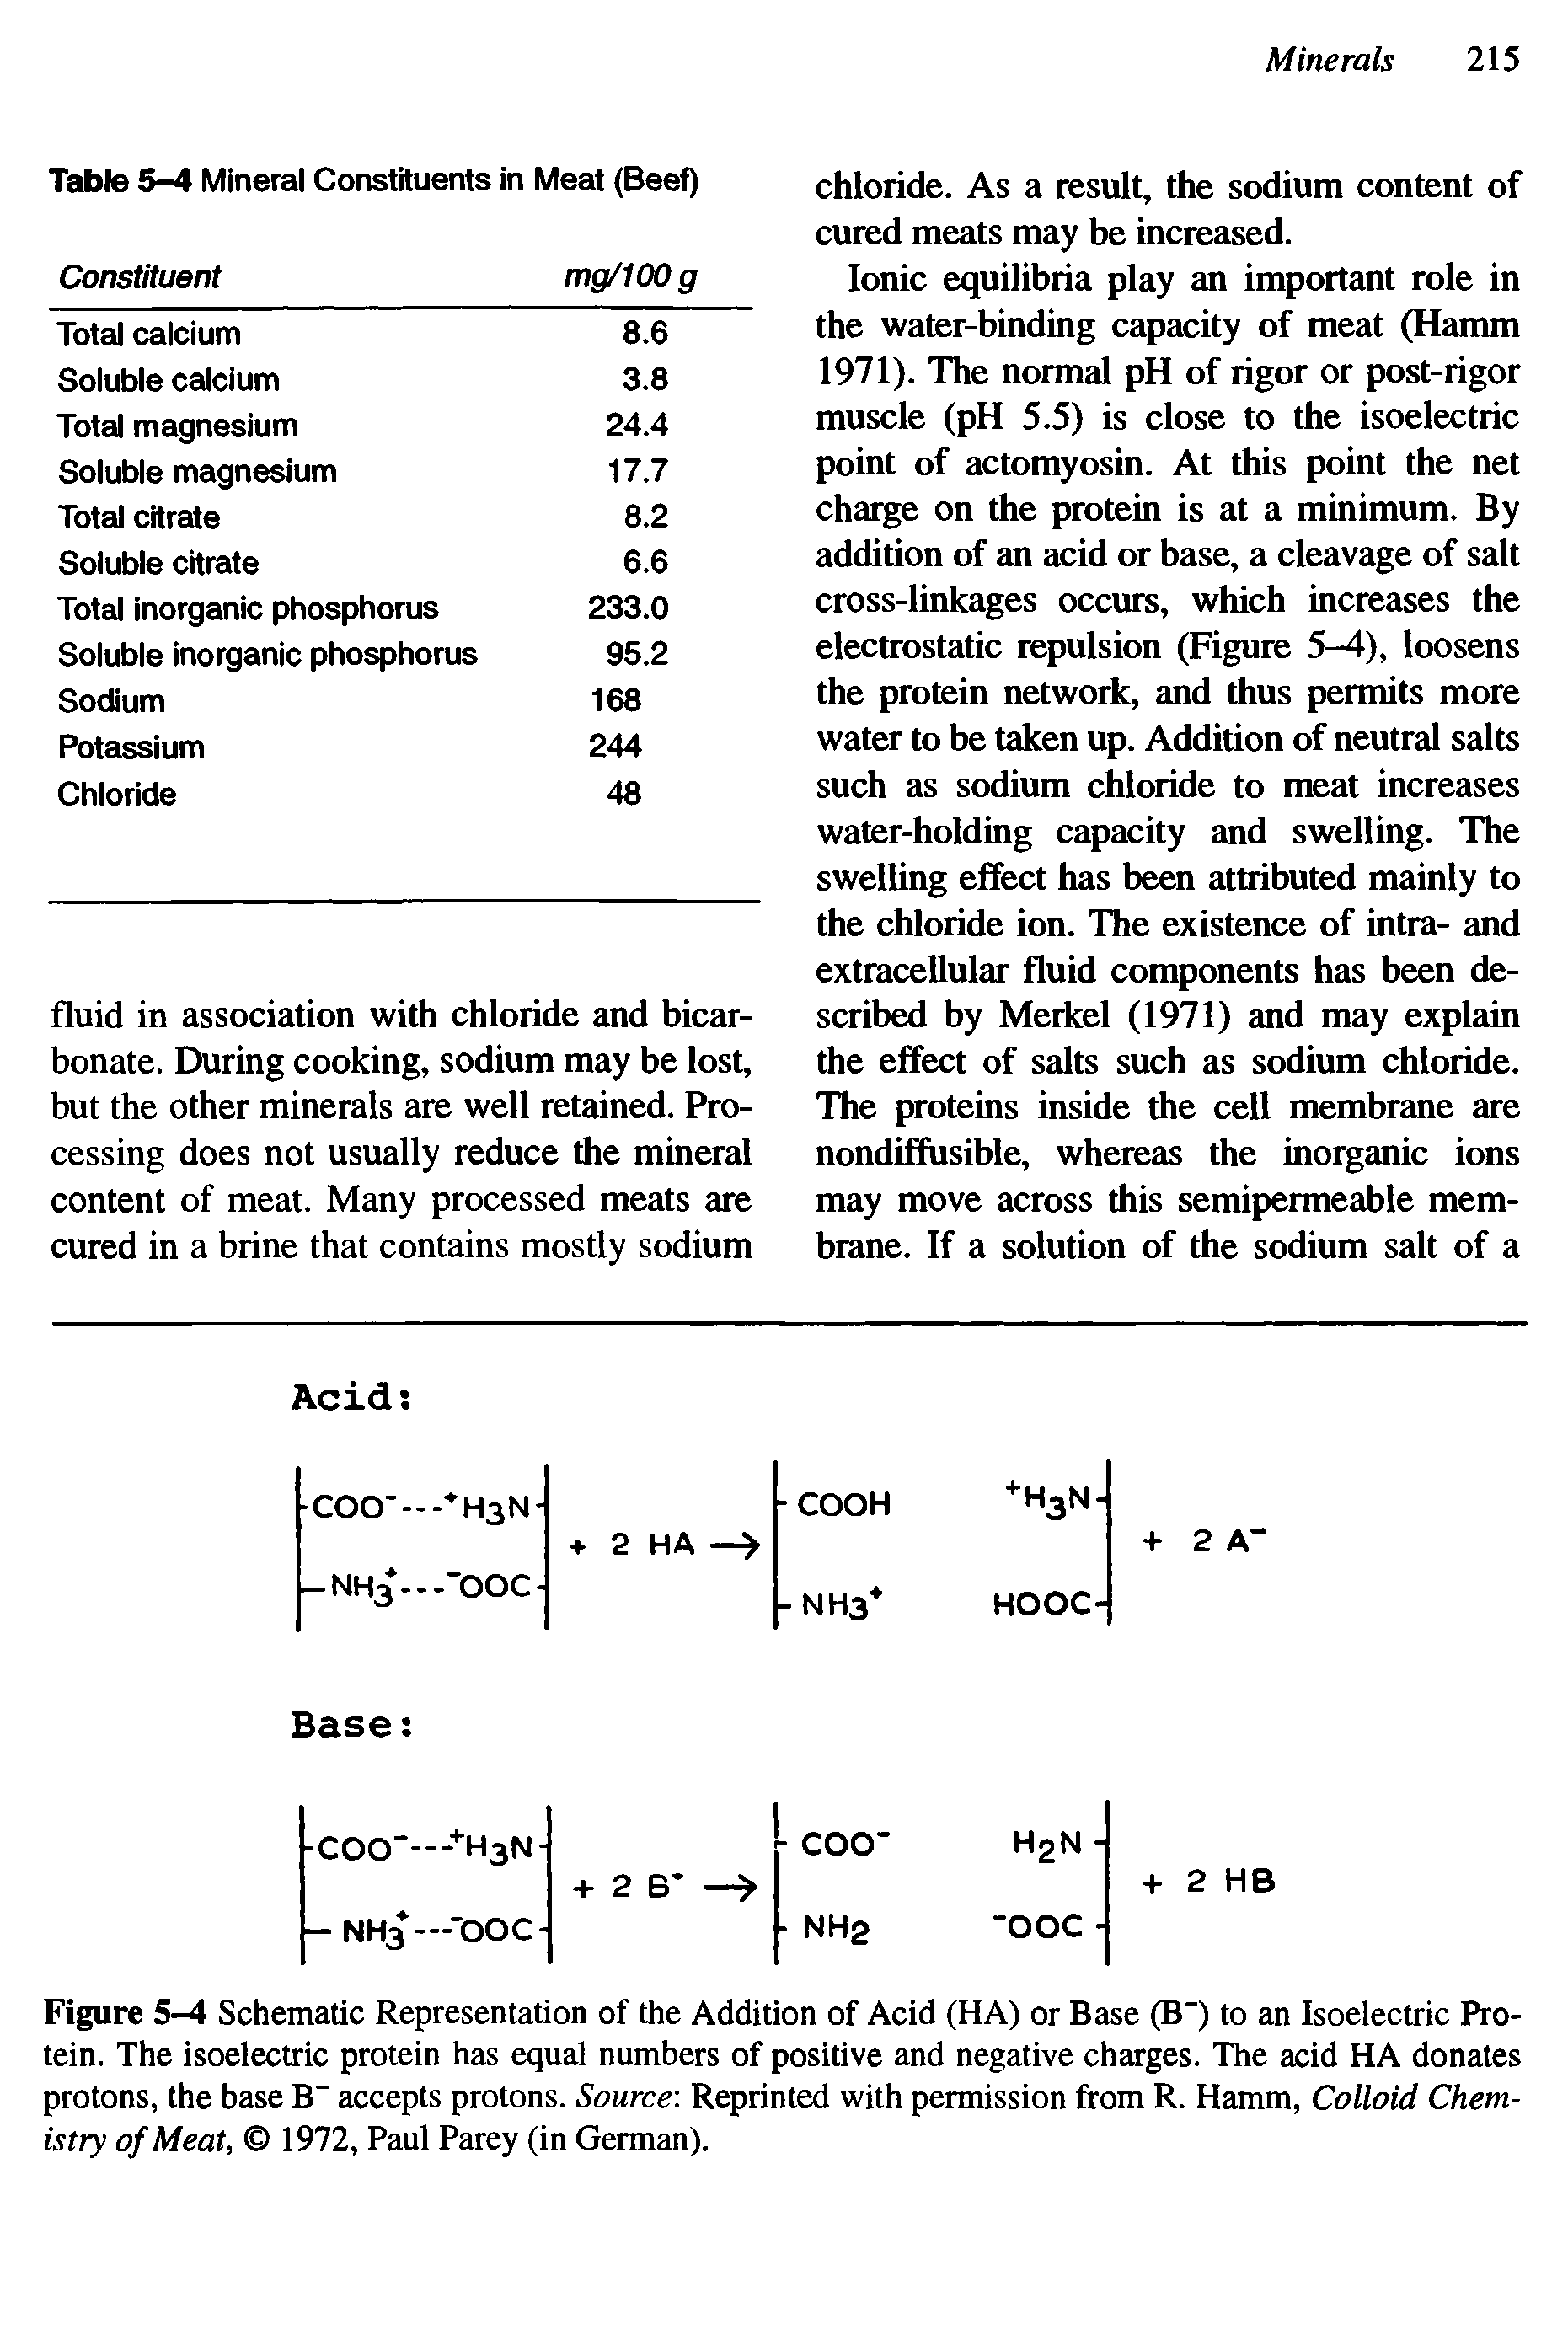 Figure 5-4 Schematic Representation of the Addition of Acid (HA) or Base (B") to an Isoelectric Protein. The isoelectric protein has equal numbers of positive and negative charges. The acid HA donates protons, the base B" accepts protons. Source Reprinted with permission from R. Hamm, Colloid Chemistry of Meat, 1972, Paul Parey (in German).